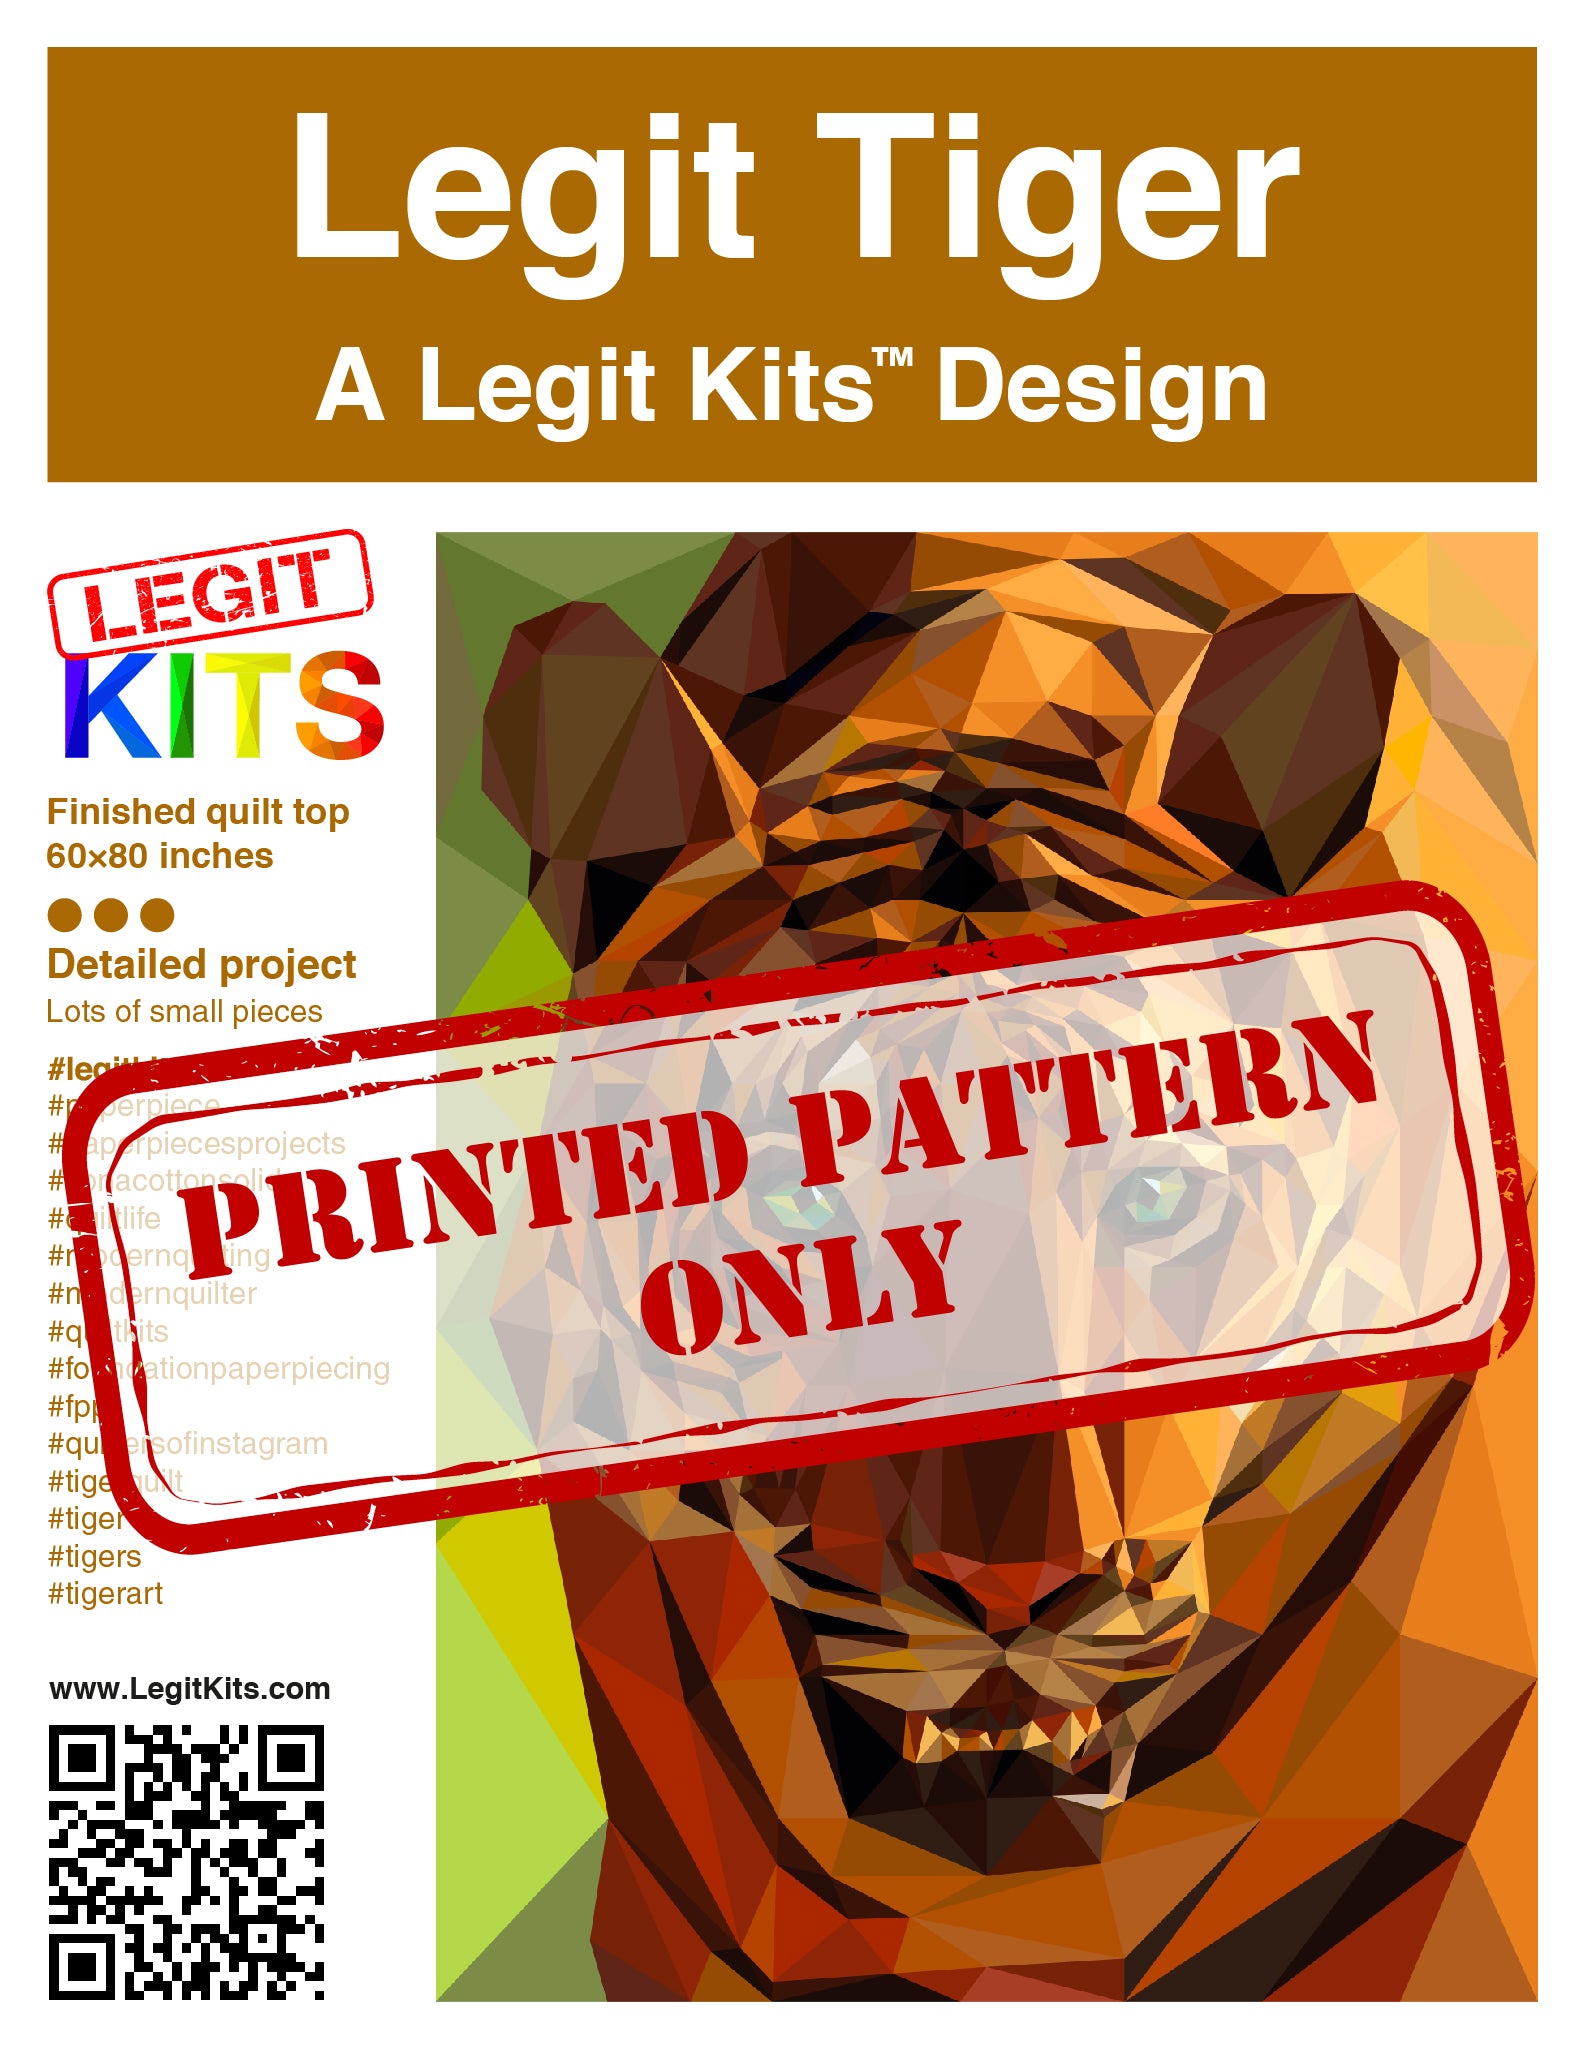 Cover for Legit Tiger with Printed pattern only stamped across front